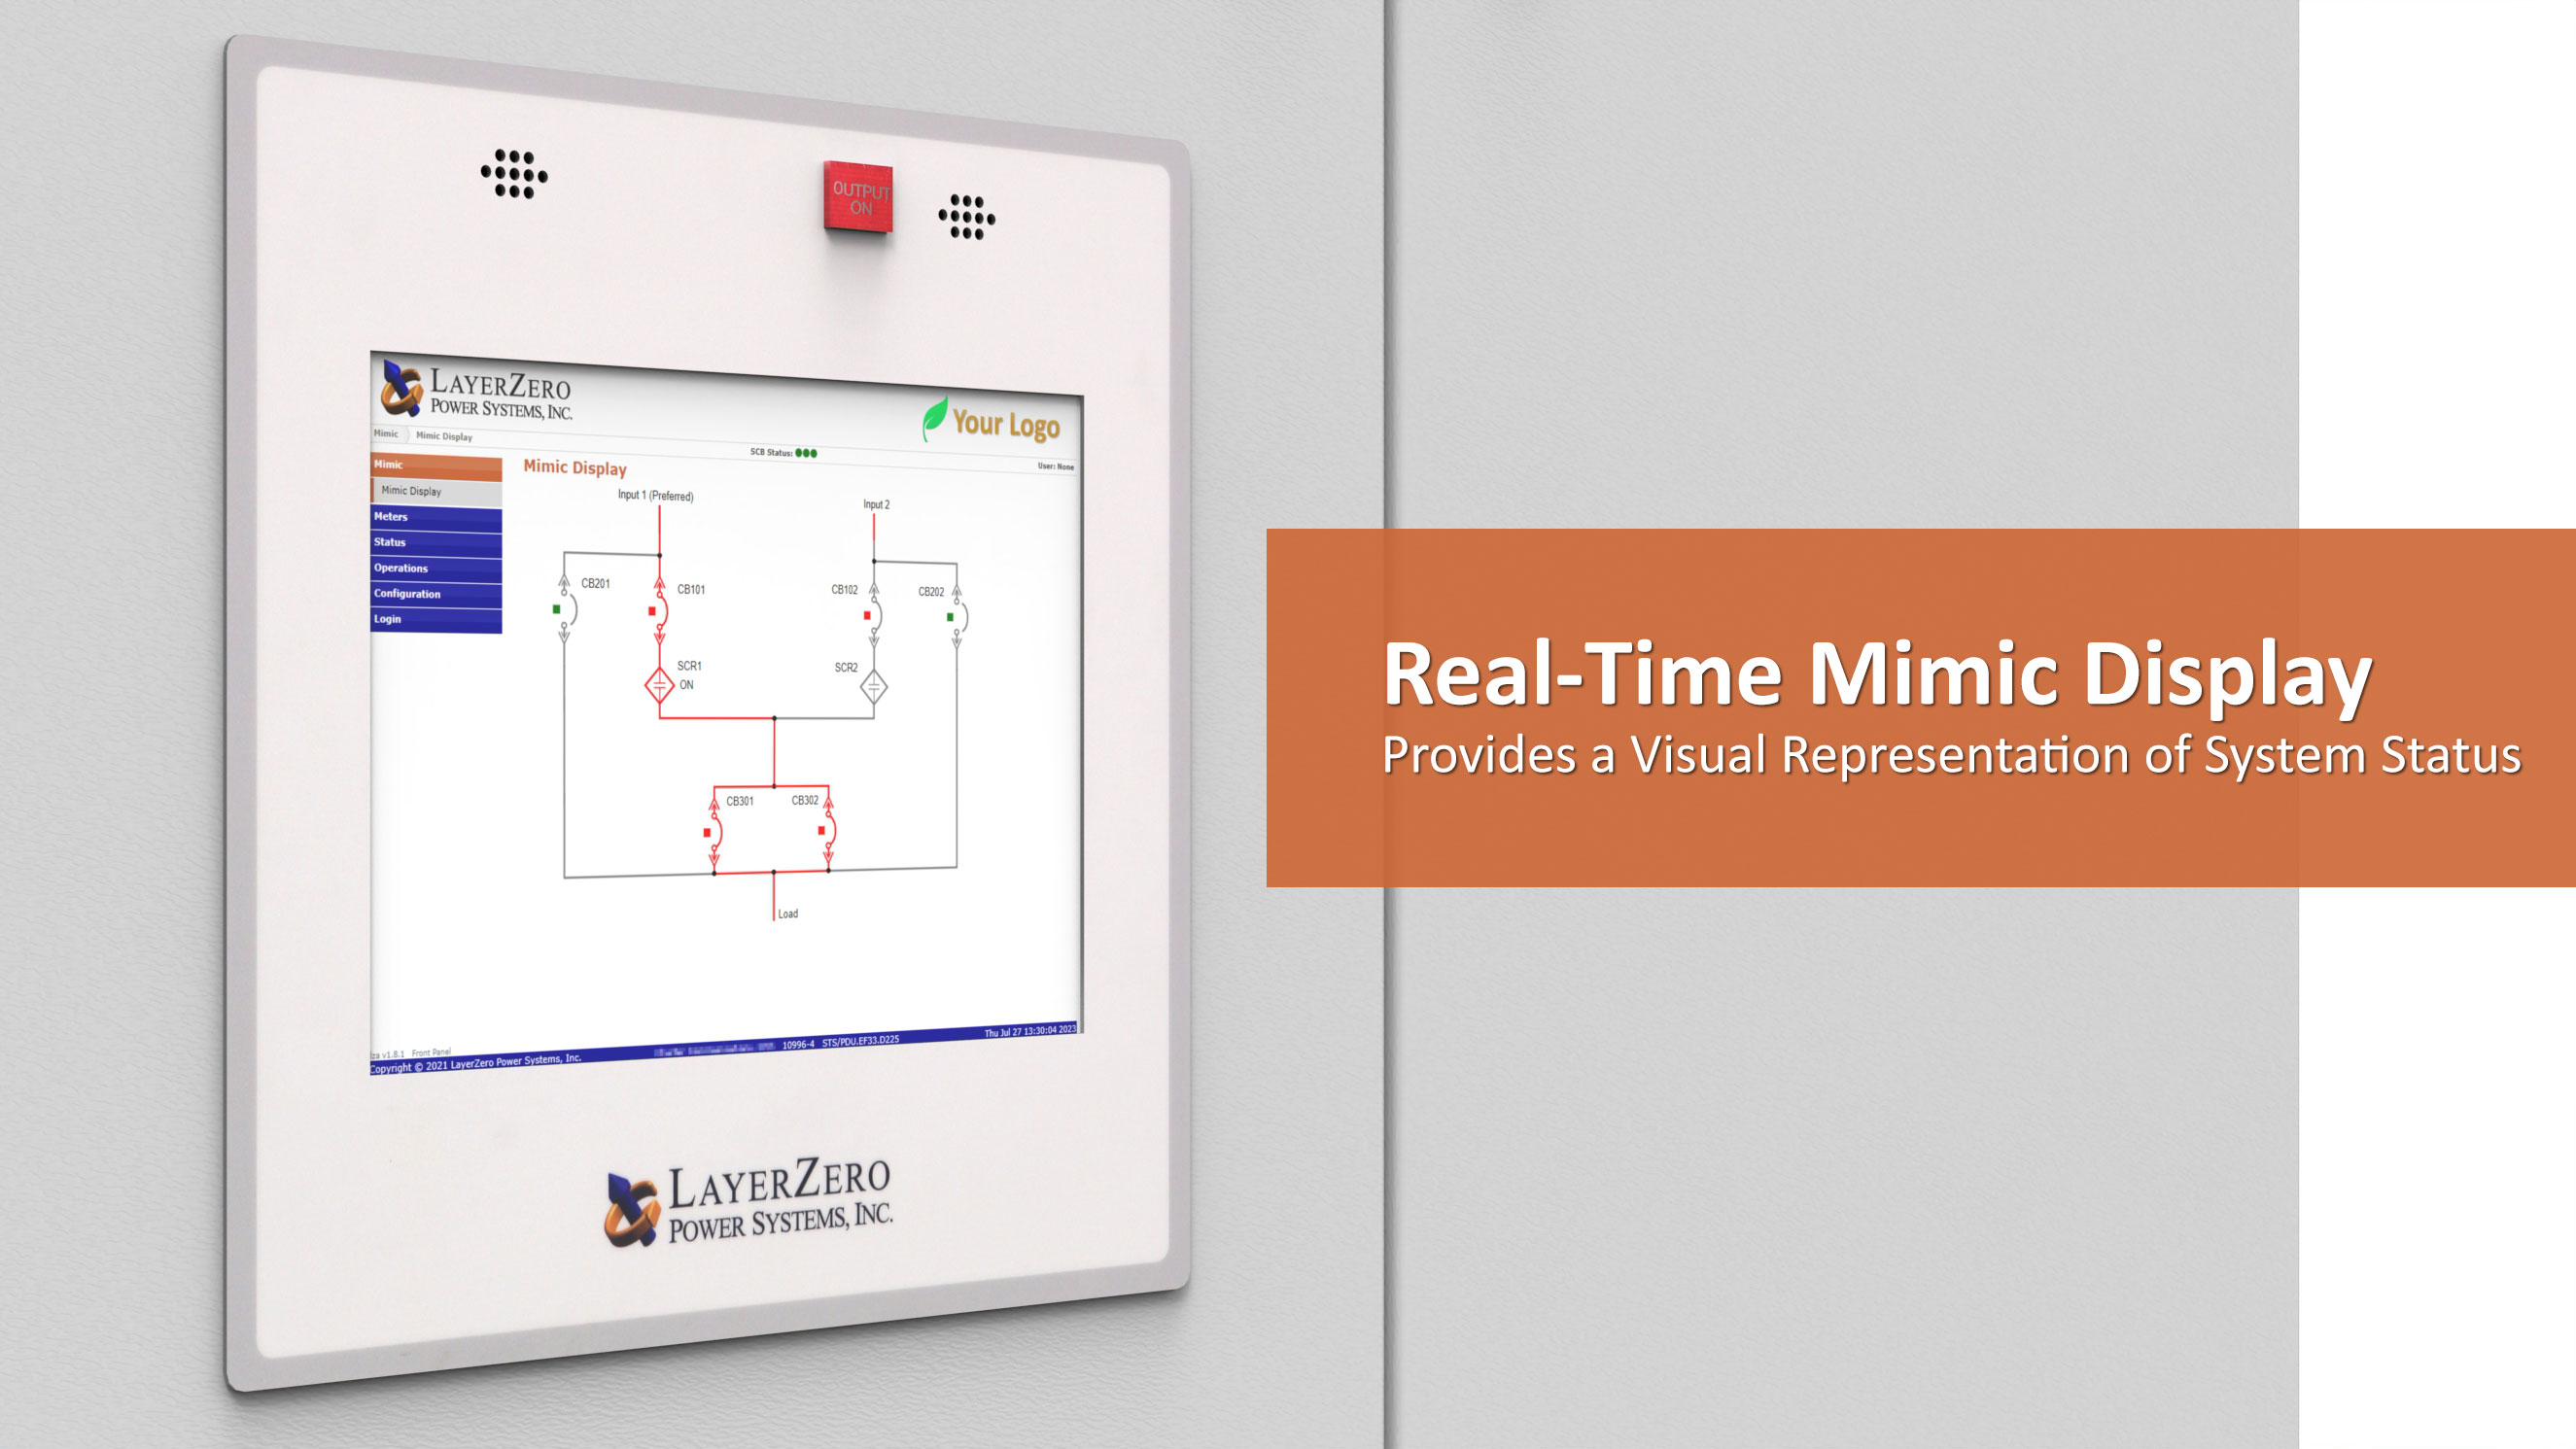 The mimic display on a LayerZero eSTS Static Transfer Switch